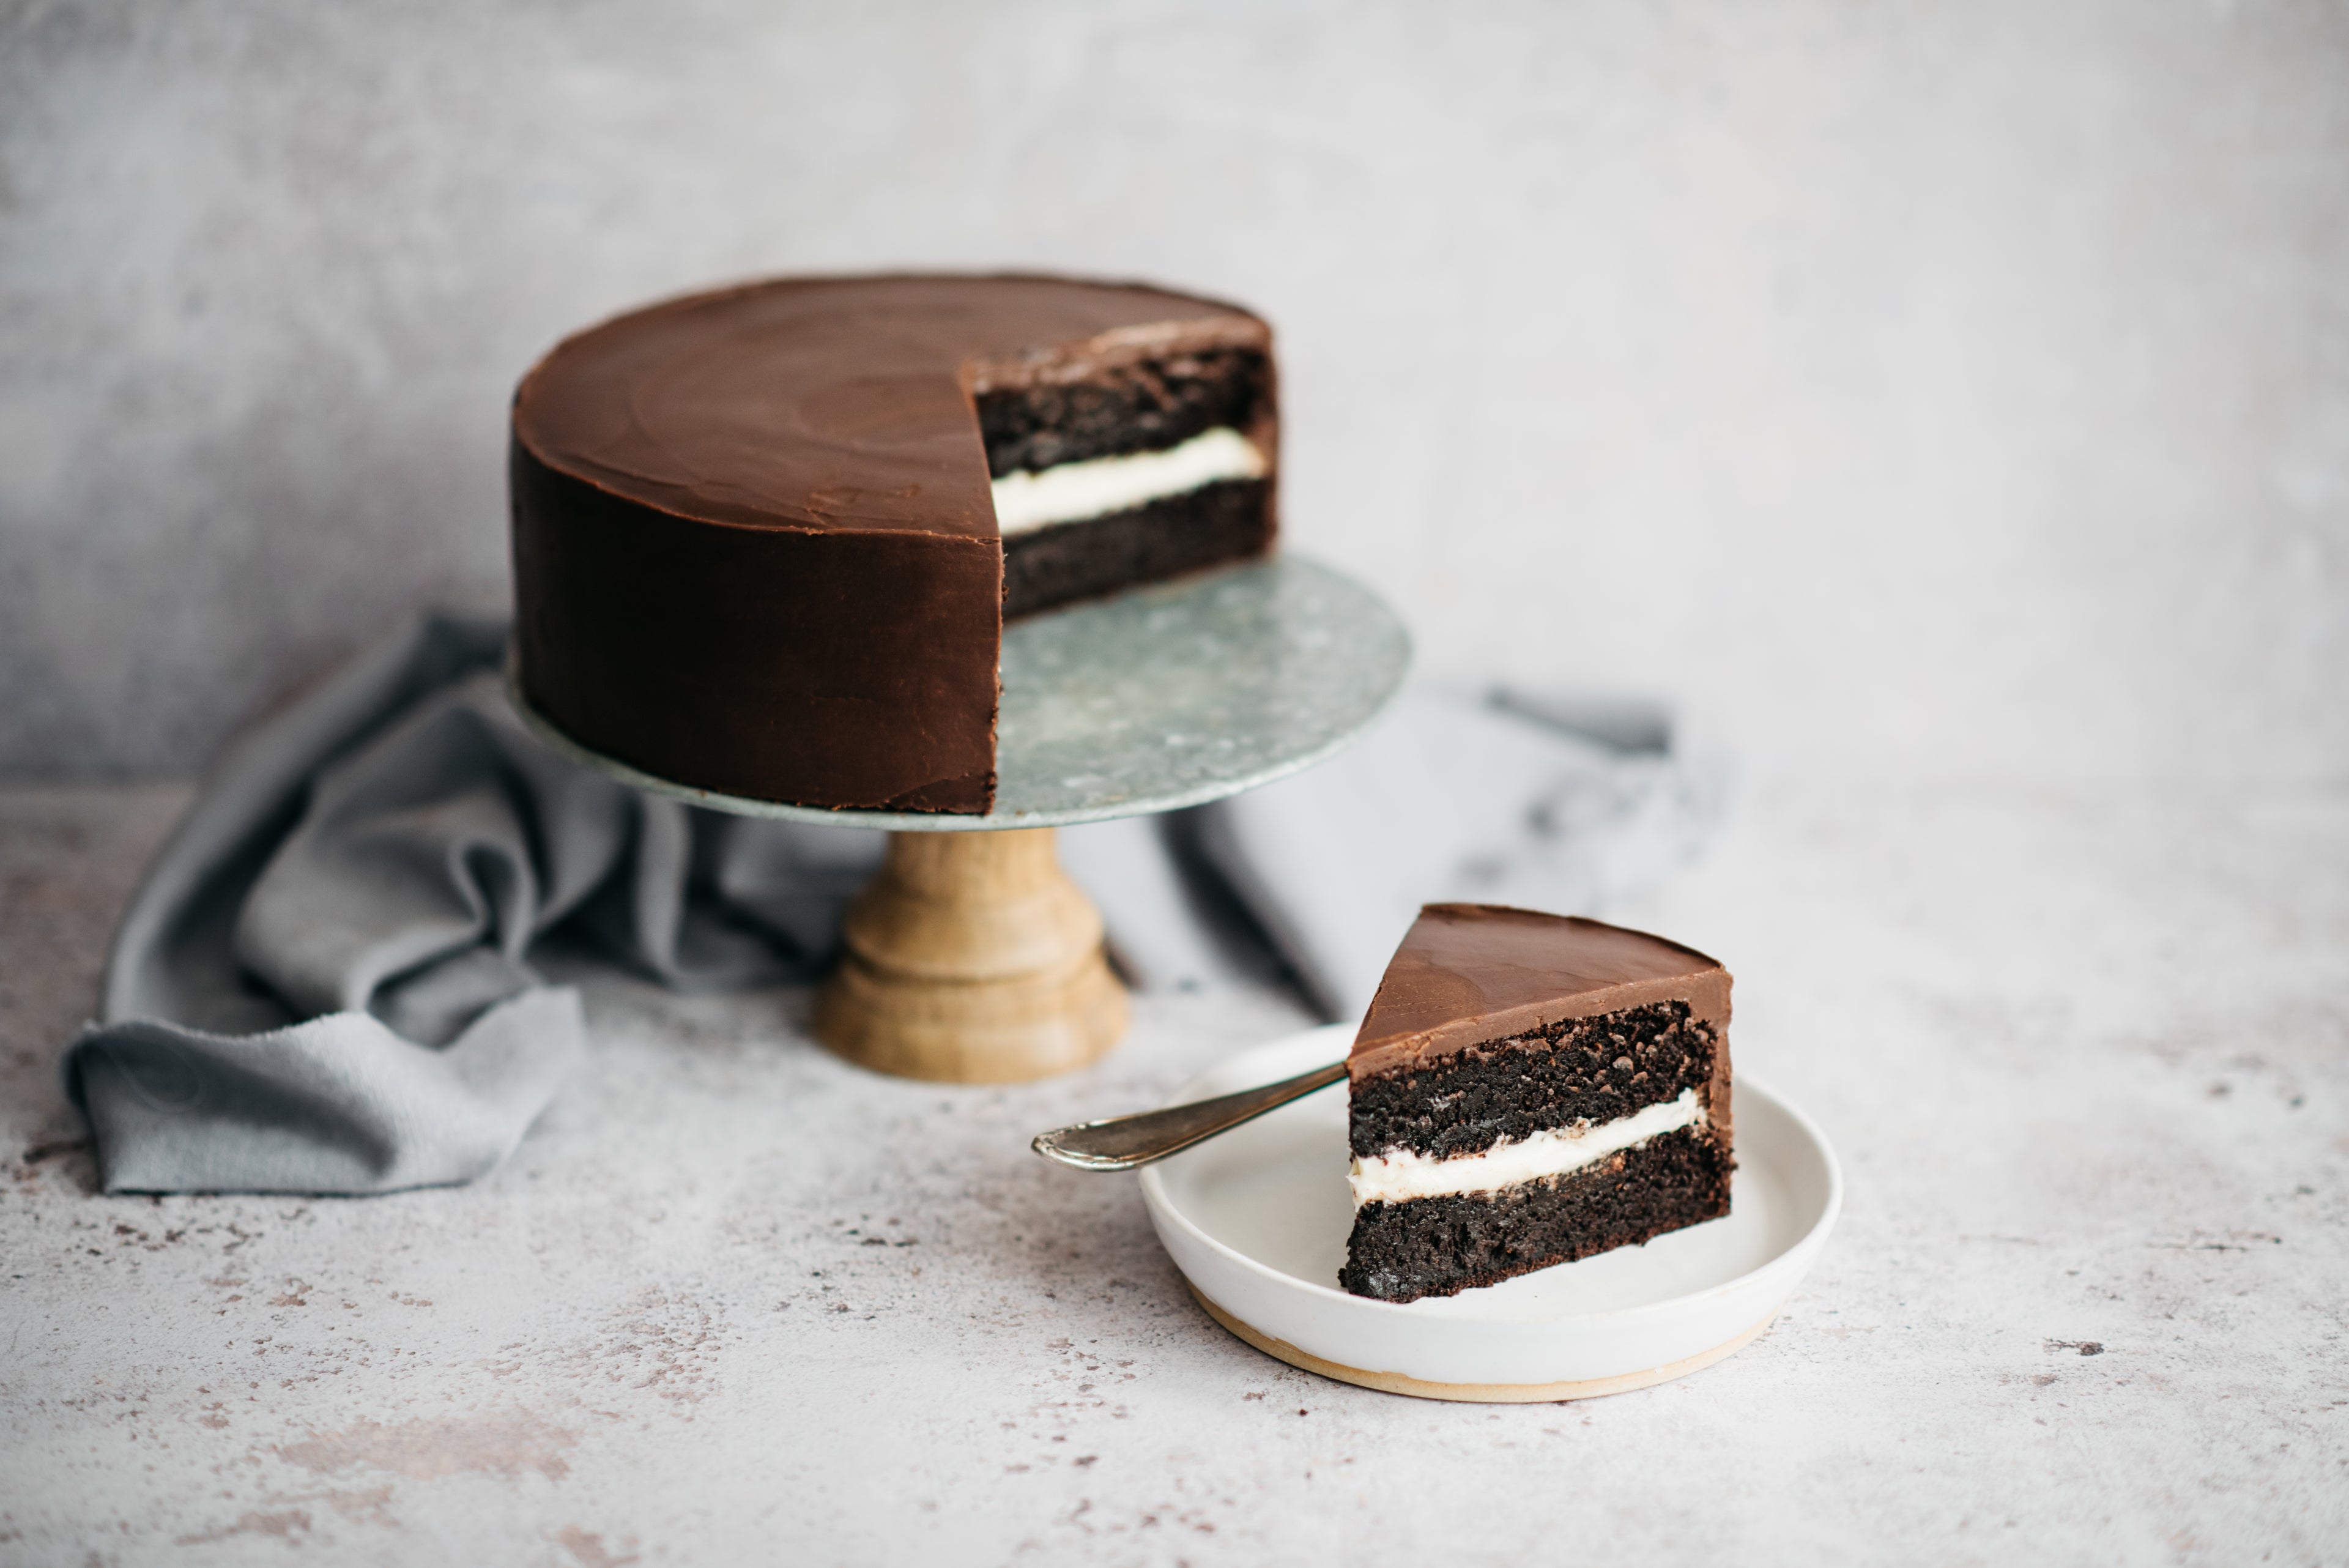 Best Chocolate Cake on a cake stand smothered in chocolate ganache with a slice cut out and served on a plate showing the creamy layer inside